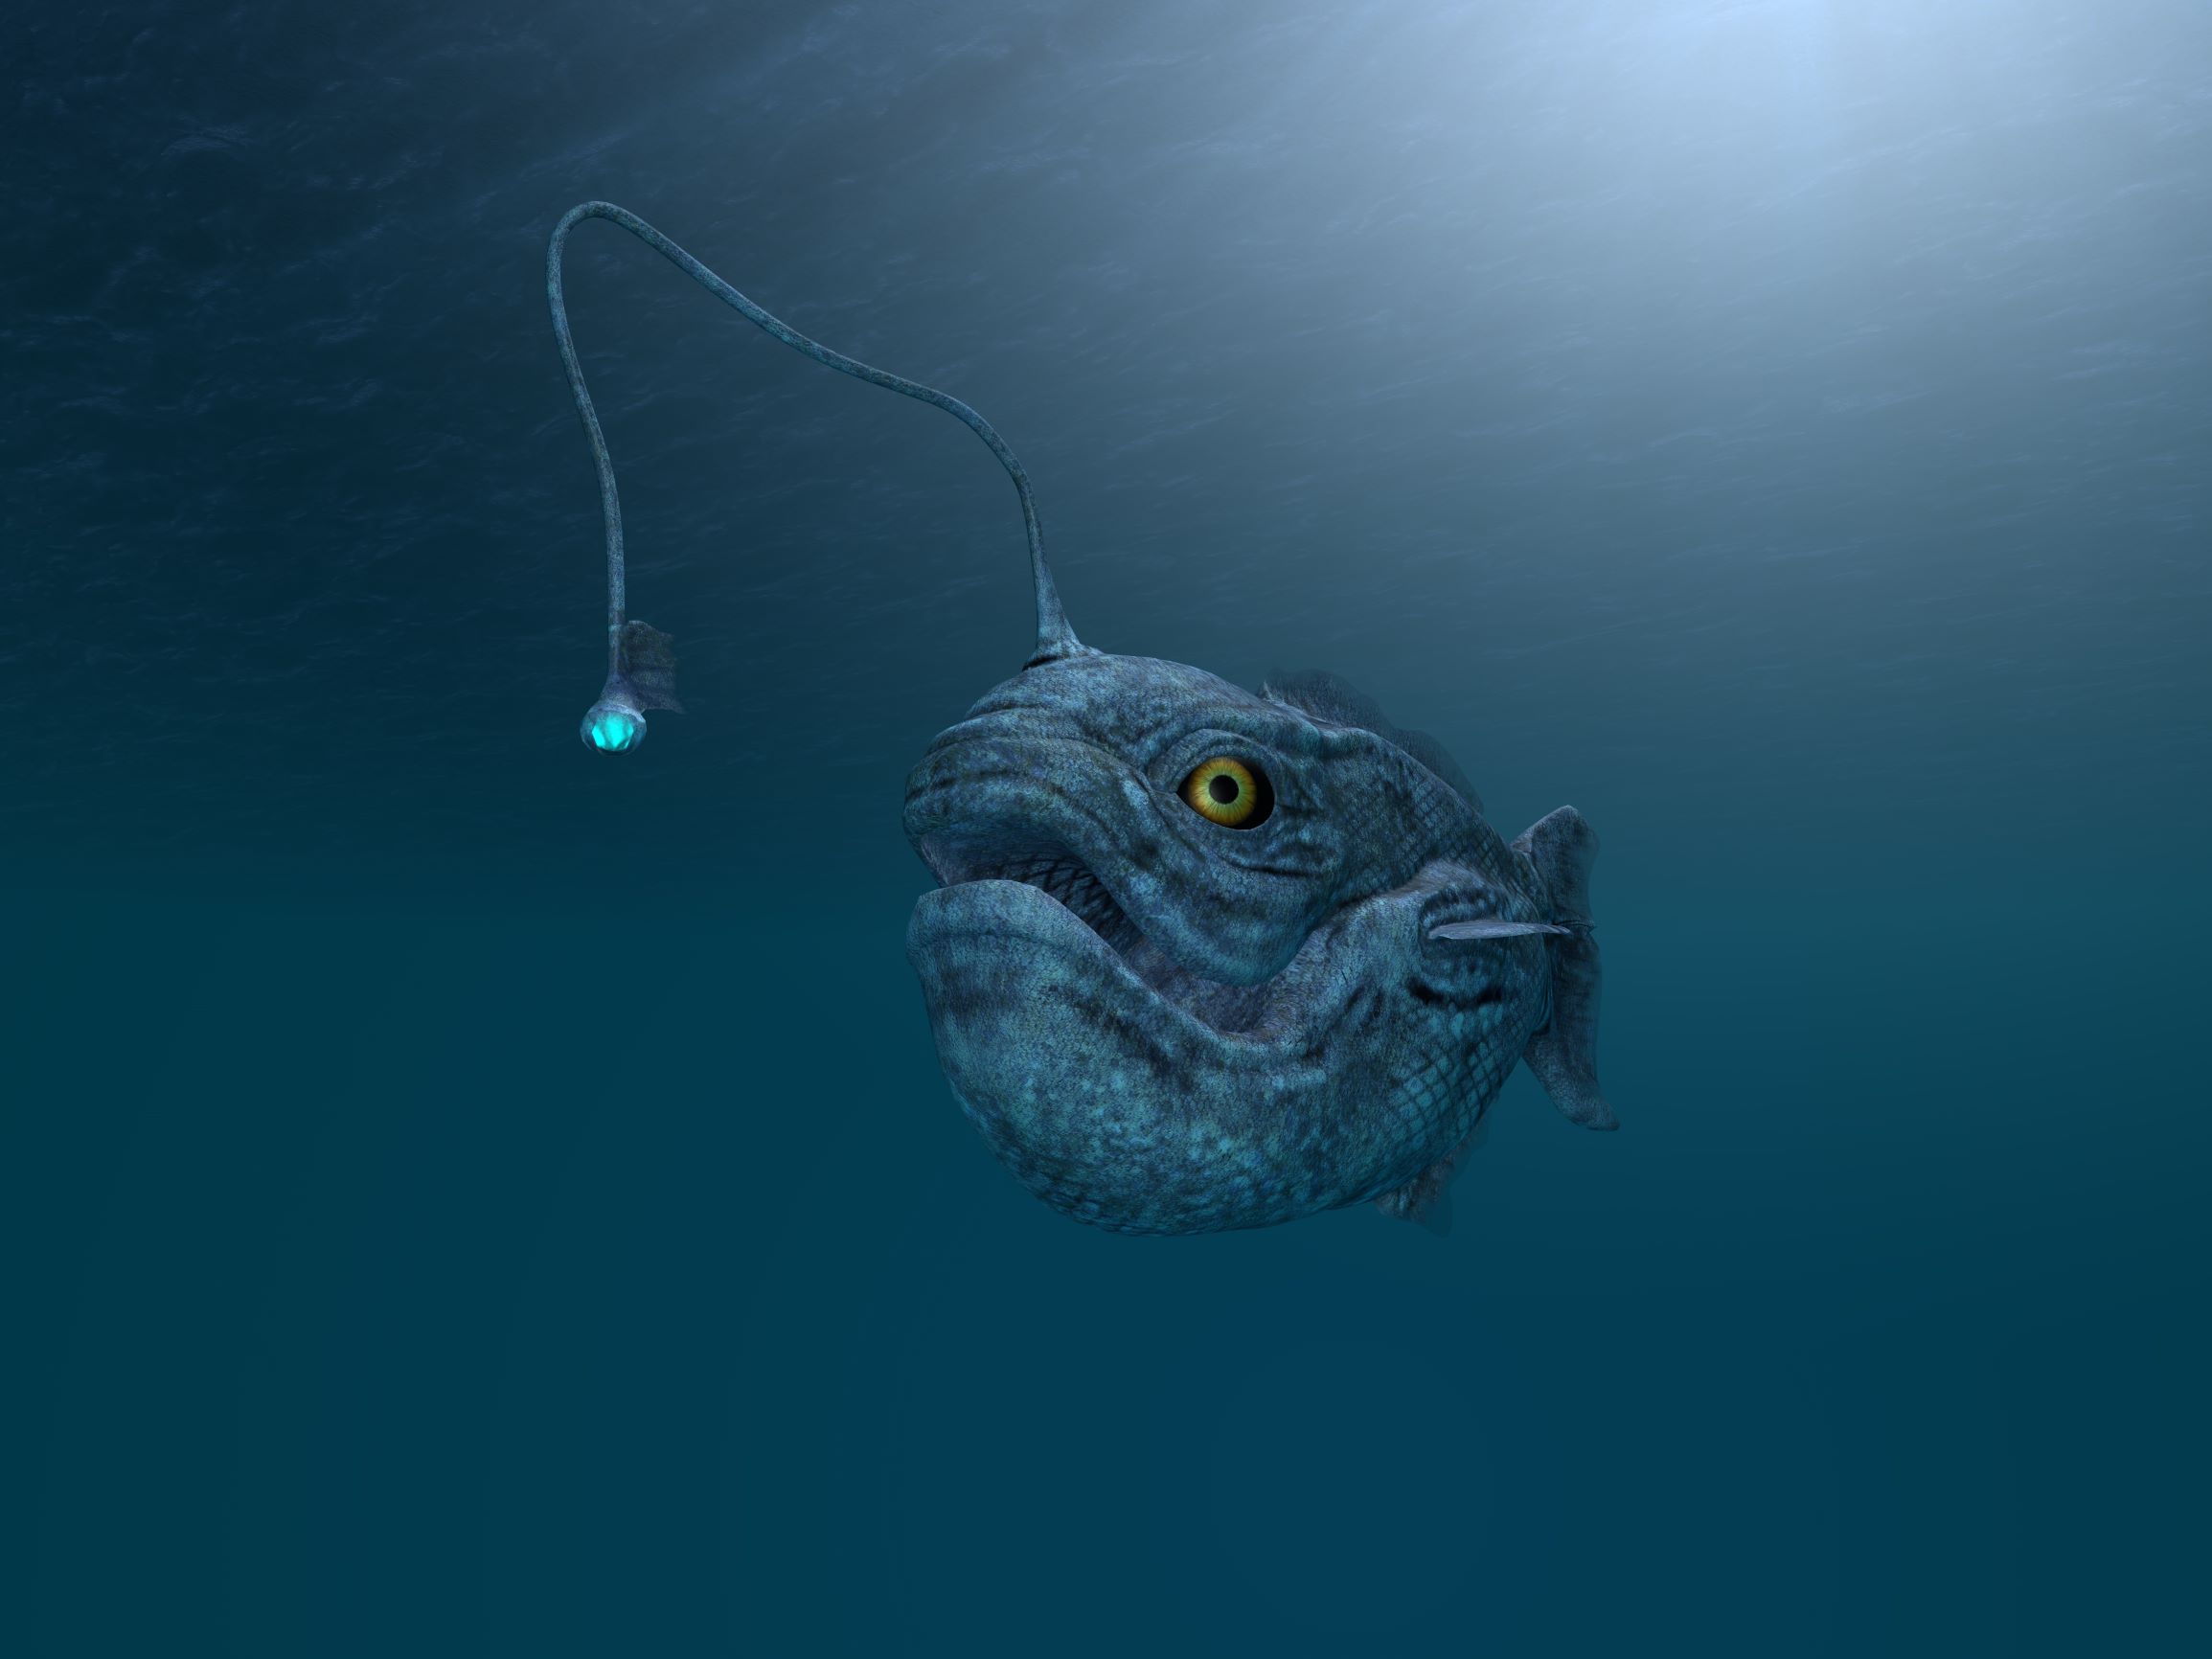 The Creepy Anglerfish Comes to Light. (Just Don't Get Too Close